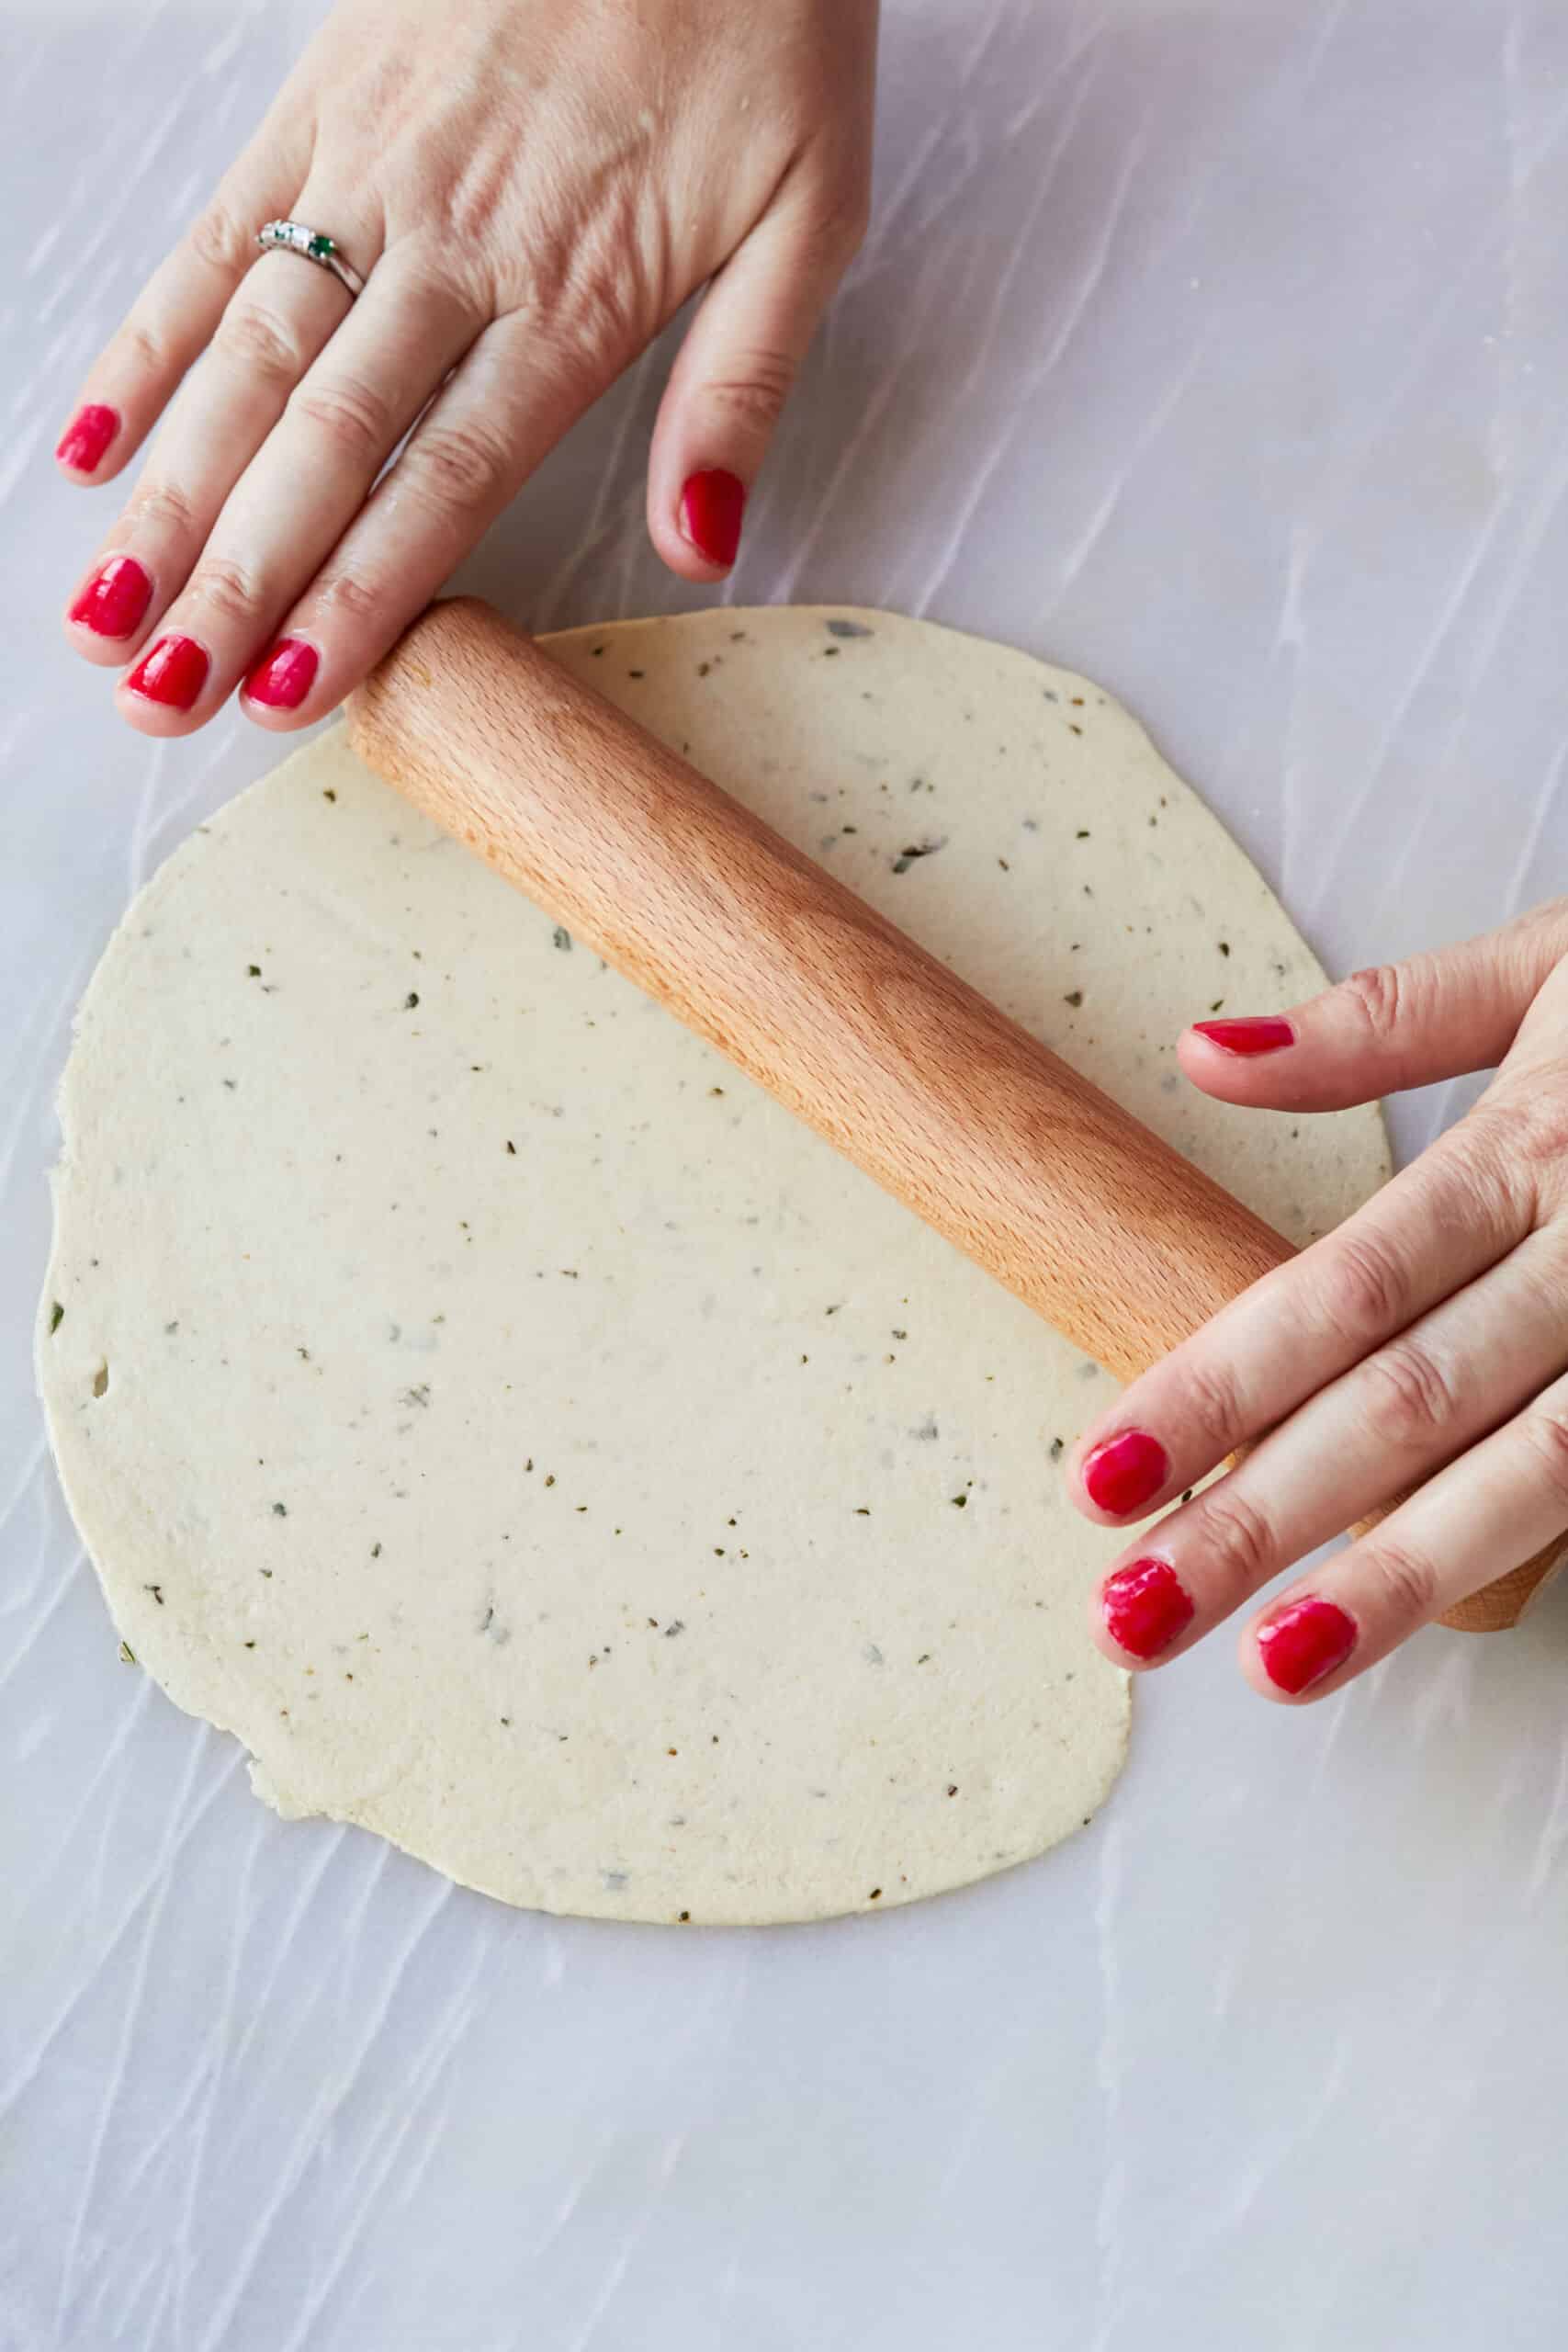 Step-by-step instructions on how to make Carta di Musica: Brush a work surface with a touch of oil and, working with one ball of dough at a time, roll the dough into a circle as thin as possible, about 8 inches (20cm).